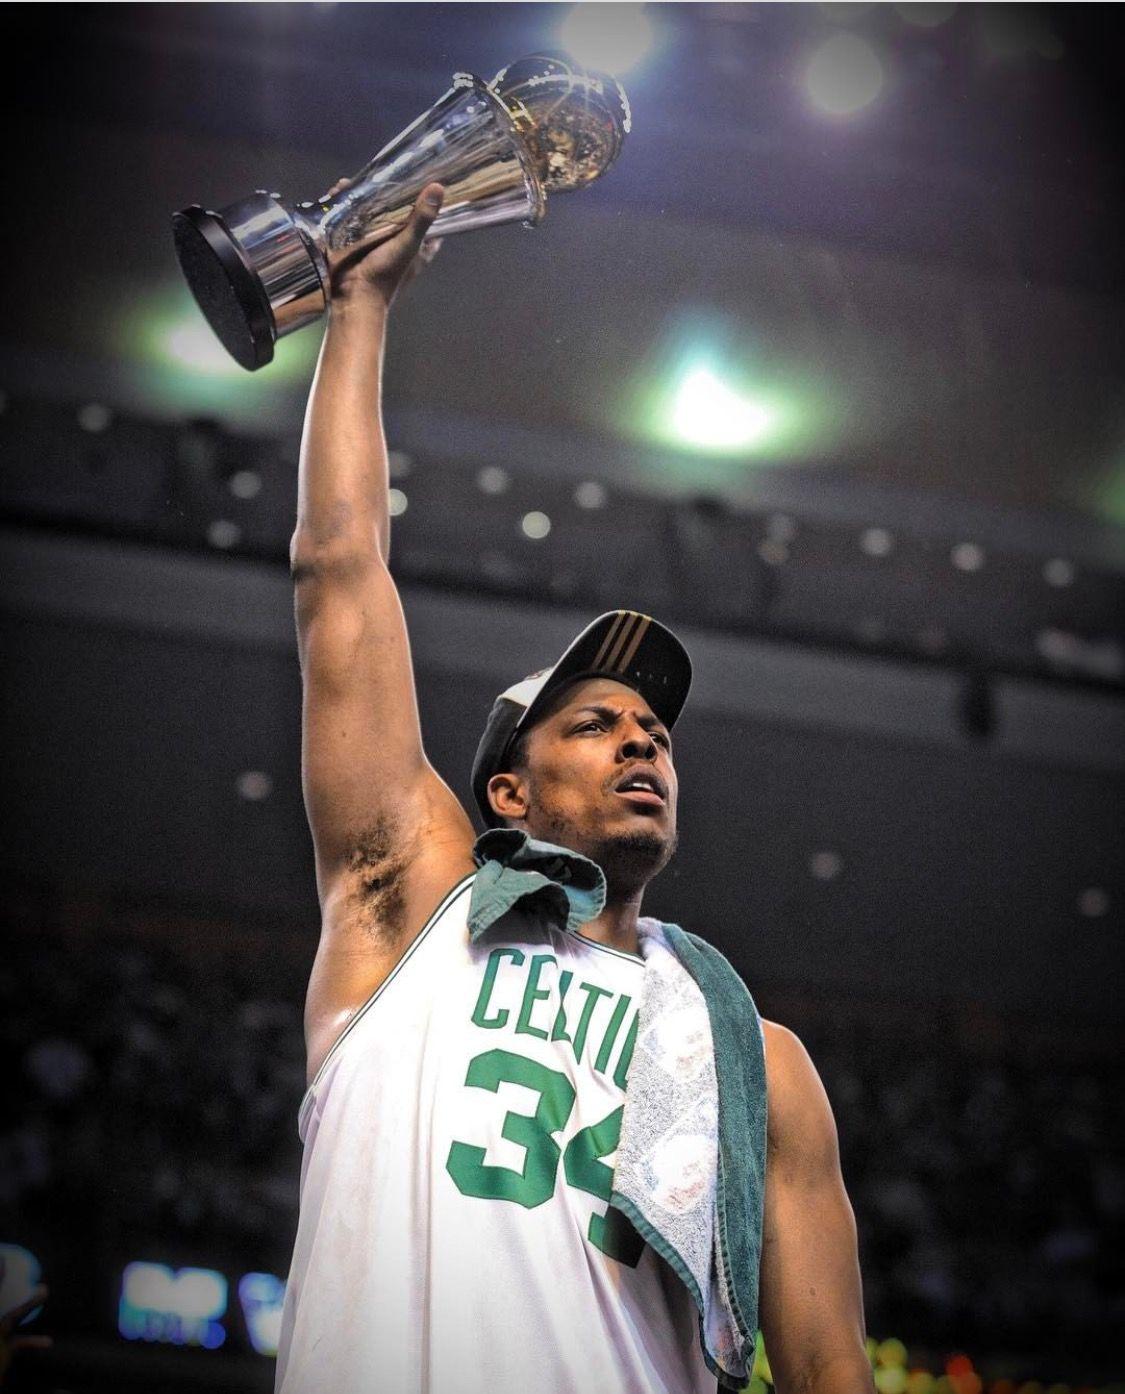 Paul Pierce just played his last game in the Boston Garden as a